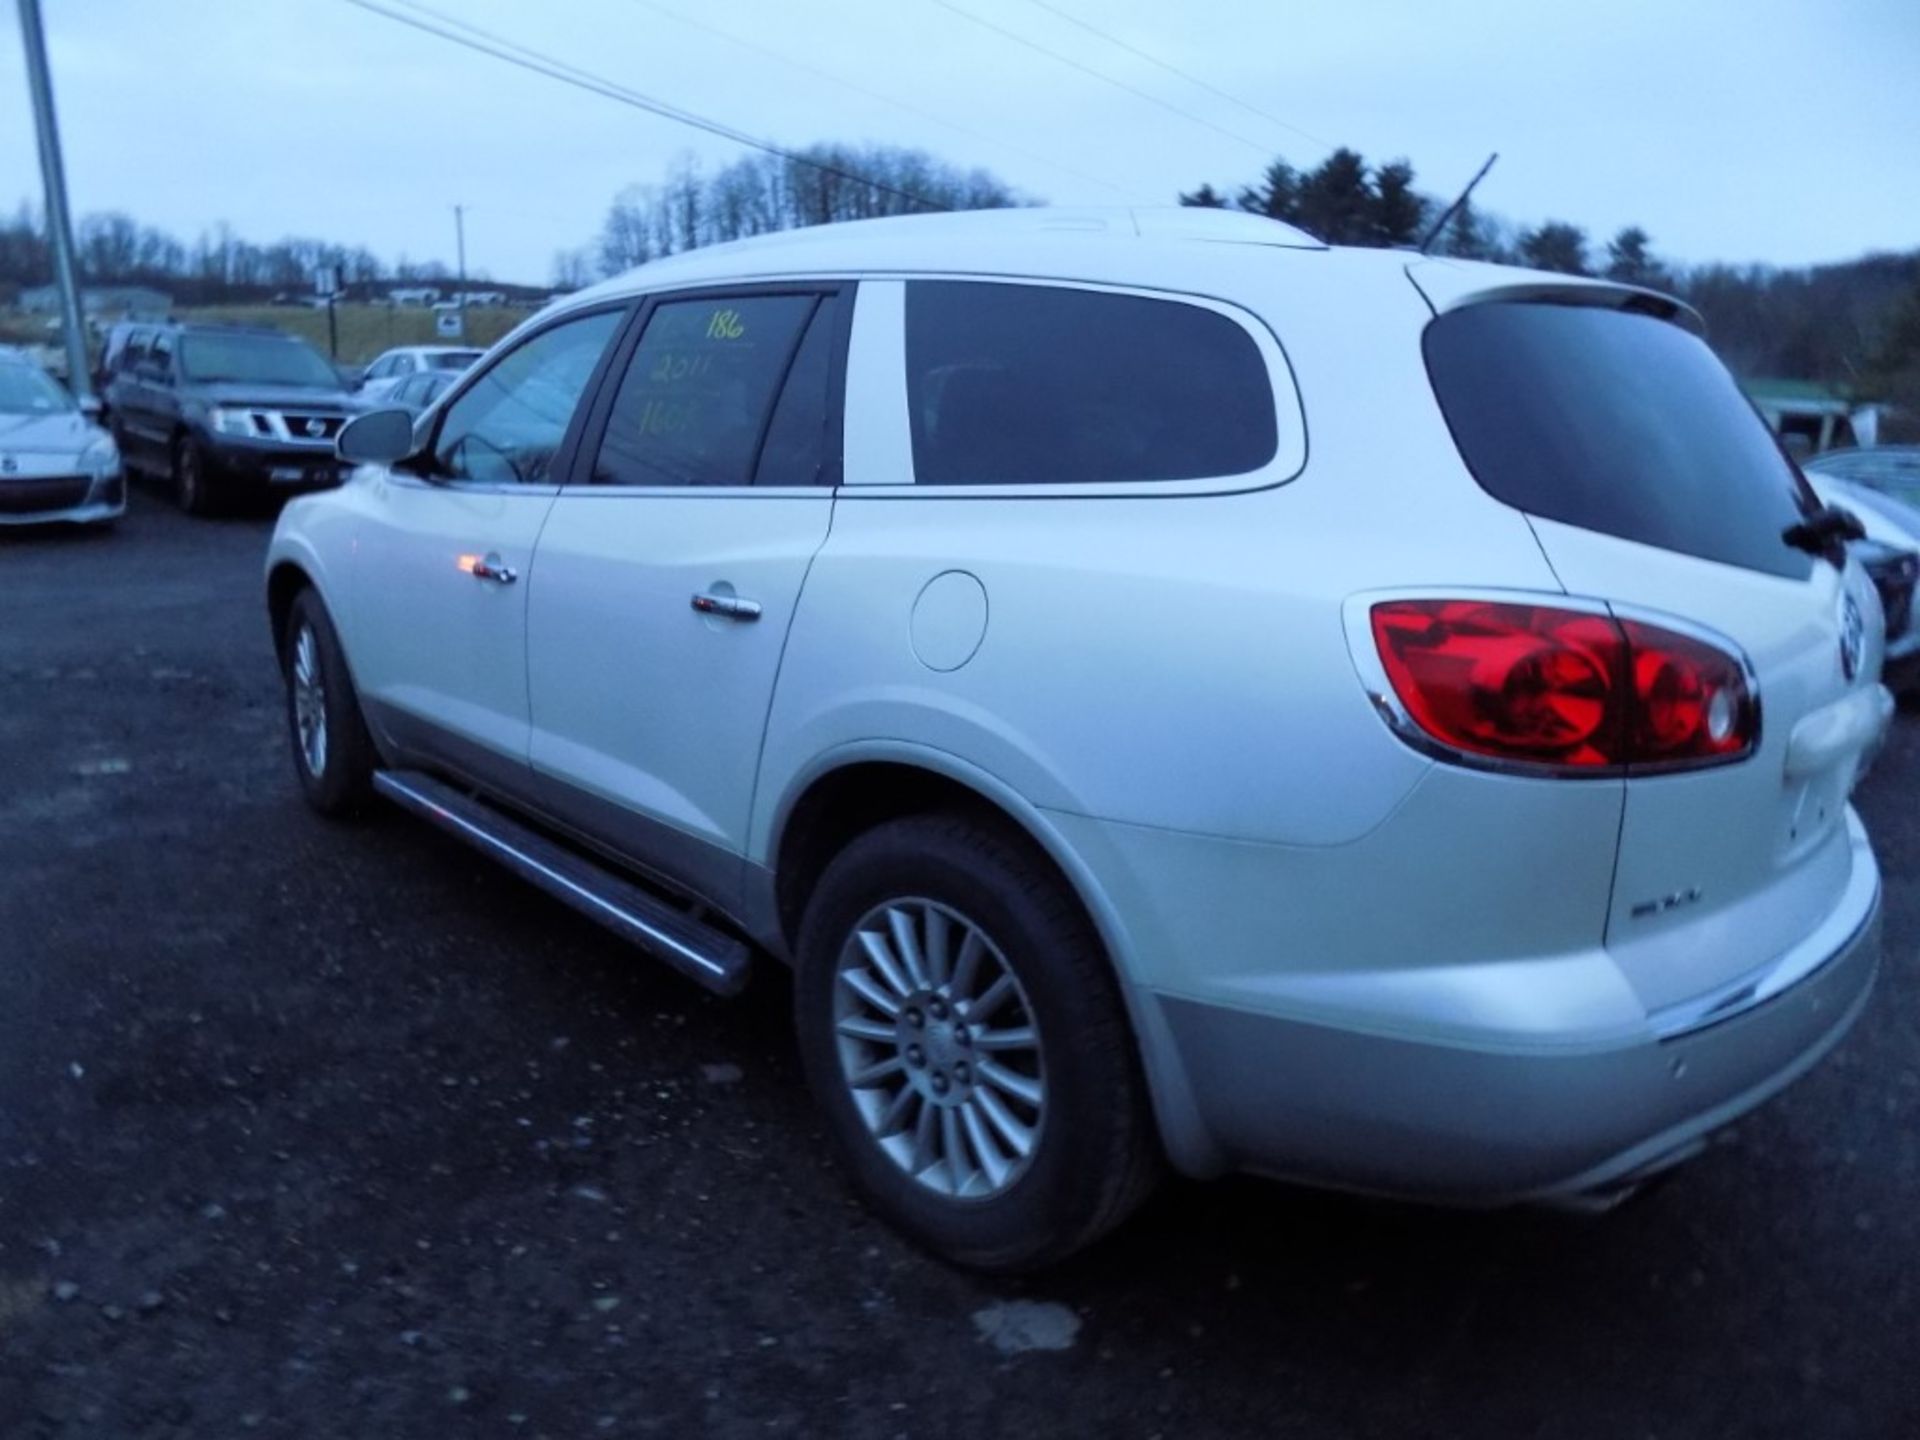 2011 Buick Enclave CXL-1, Leather, Sunroof, Front Wheel Drive, White, 160,845 Mi, PASSENGER FRONT - Image 8 of 13